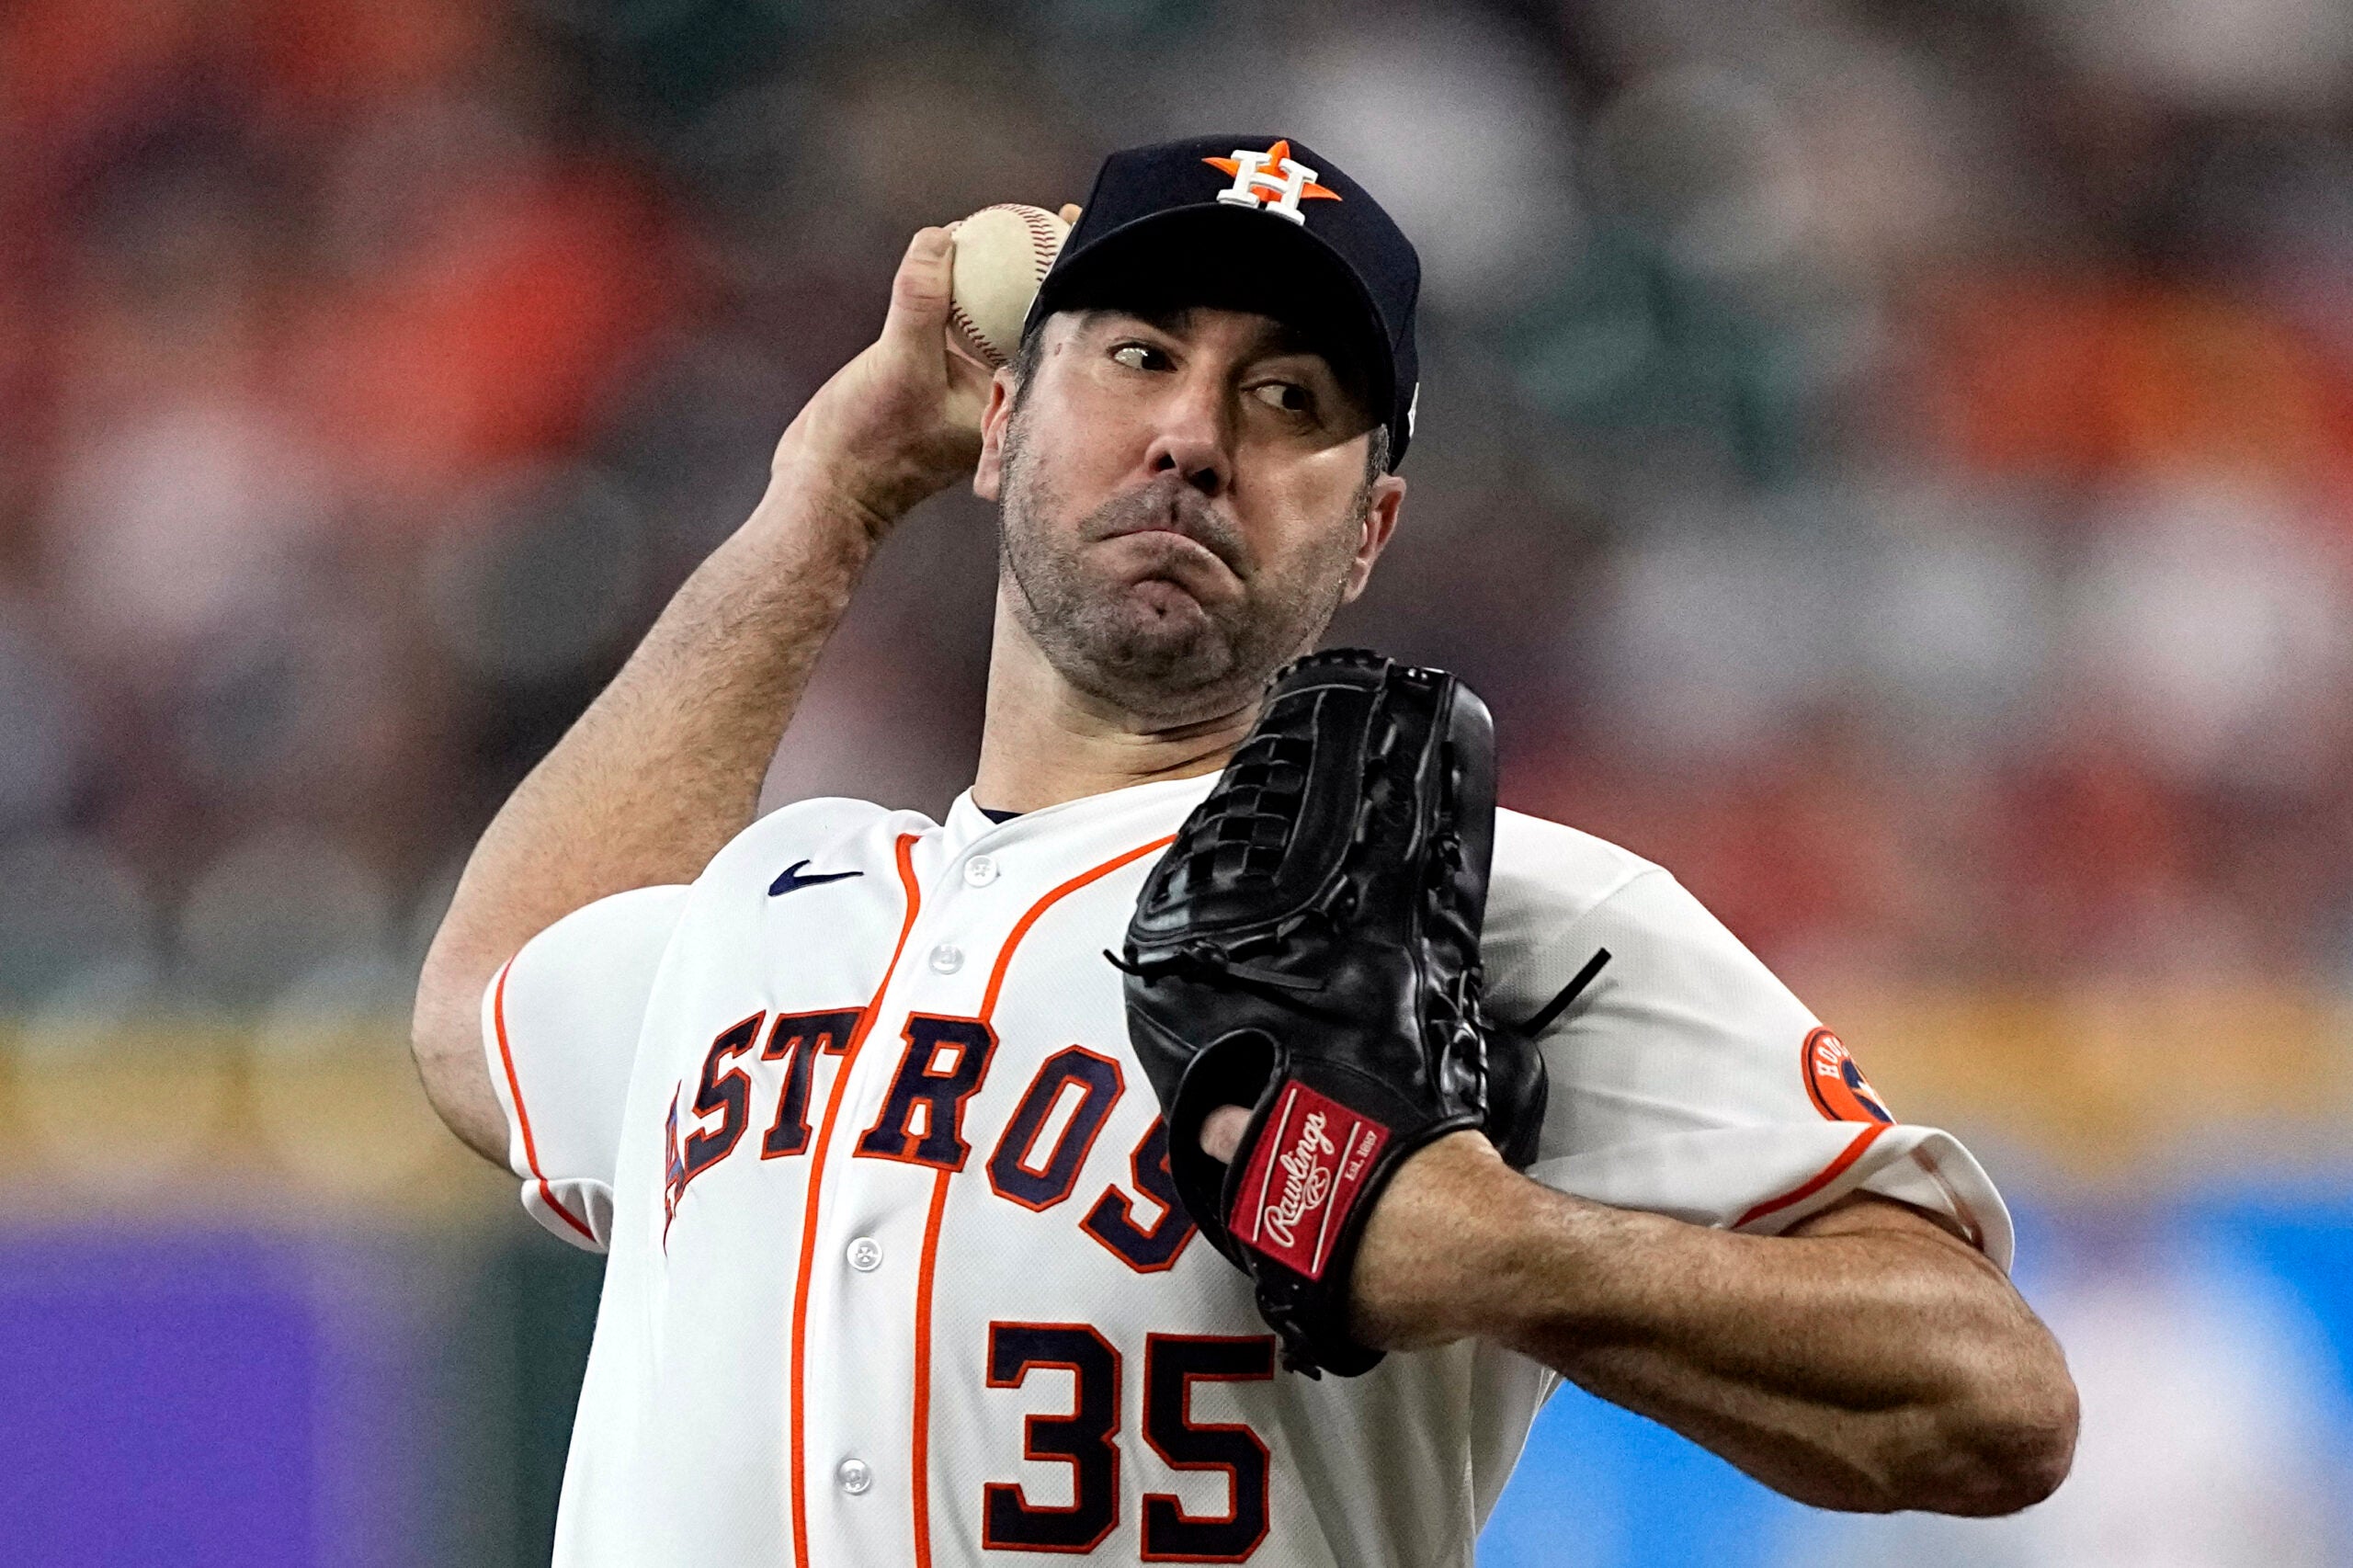 Houston Astros starting pitcher Justin Verlander throws against the Minnesota Twins during the first inning of a baseball game Tuesday, Aug. 23, 2022, in Houston.